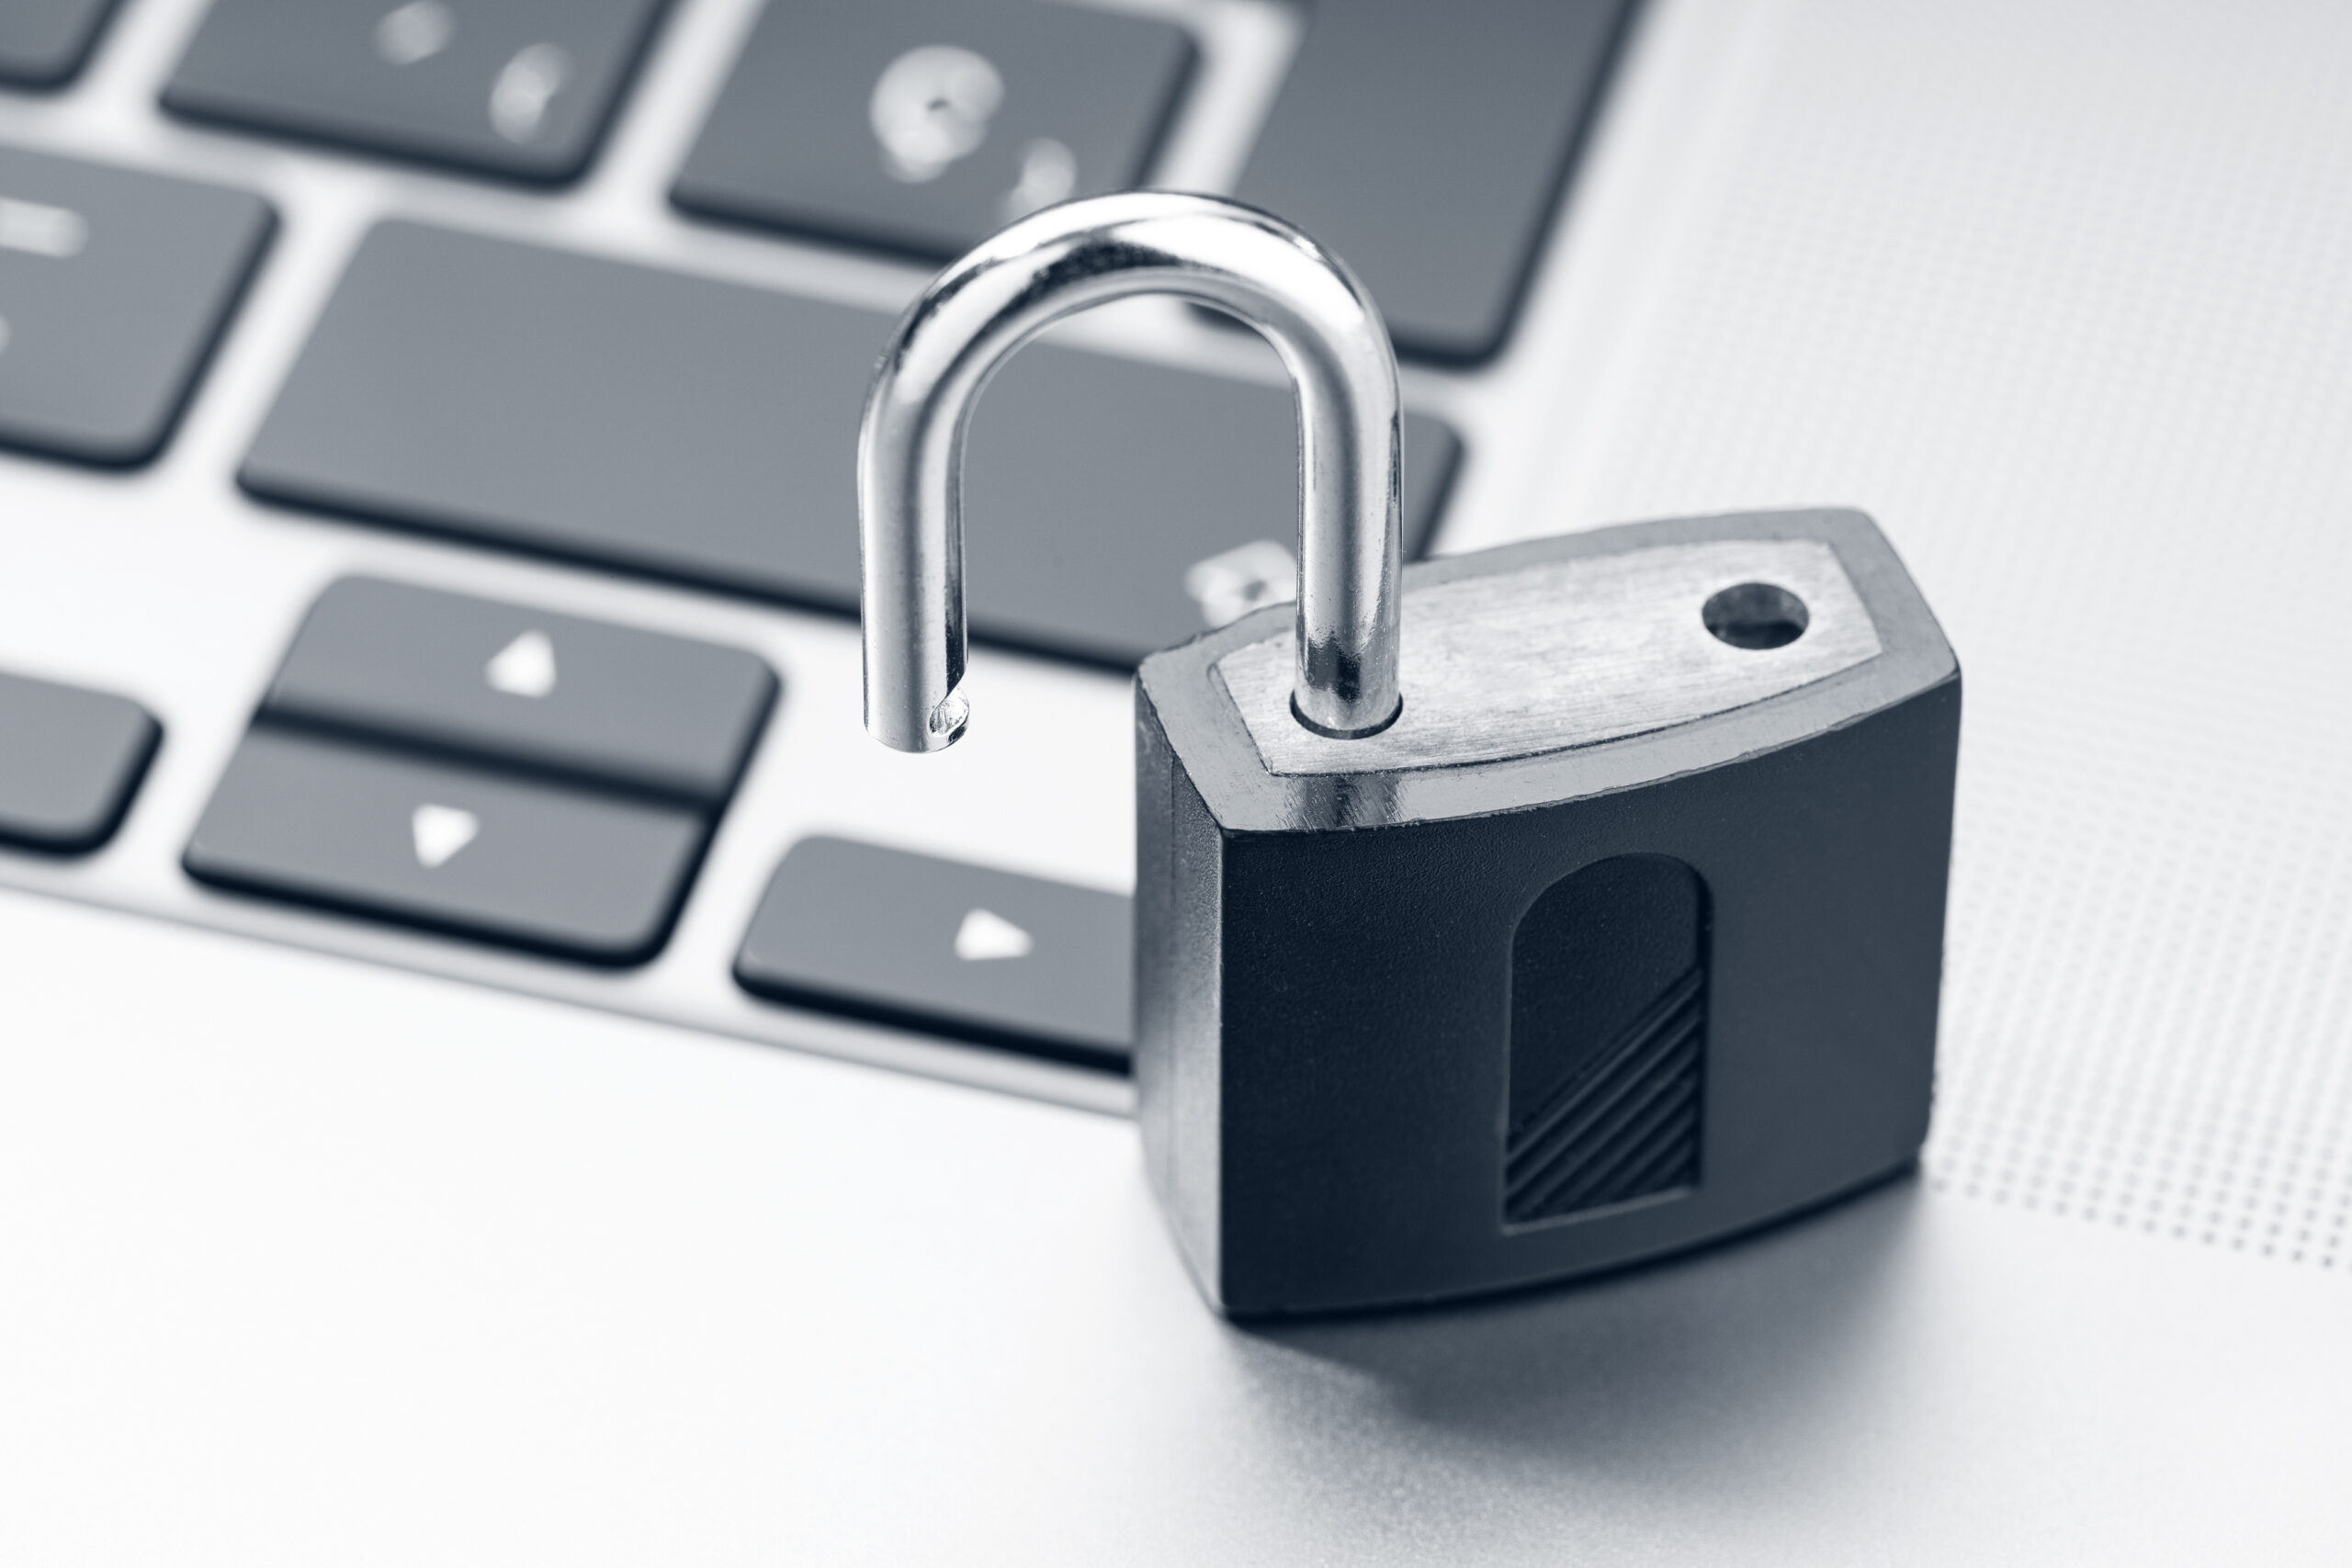 A close-up of an open silver padlock on a laptop keyboard, symbolizing data security in the context of open access publications.